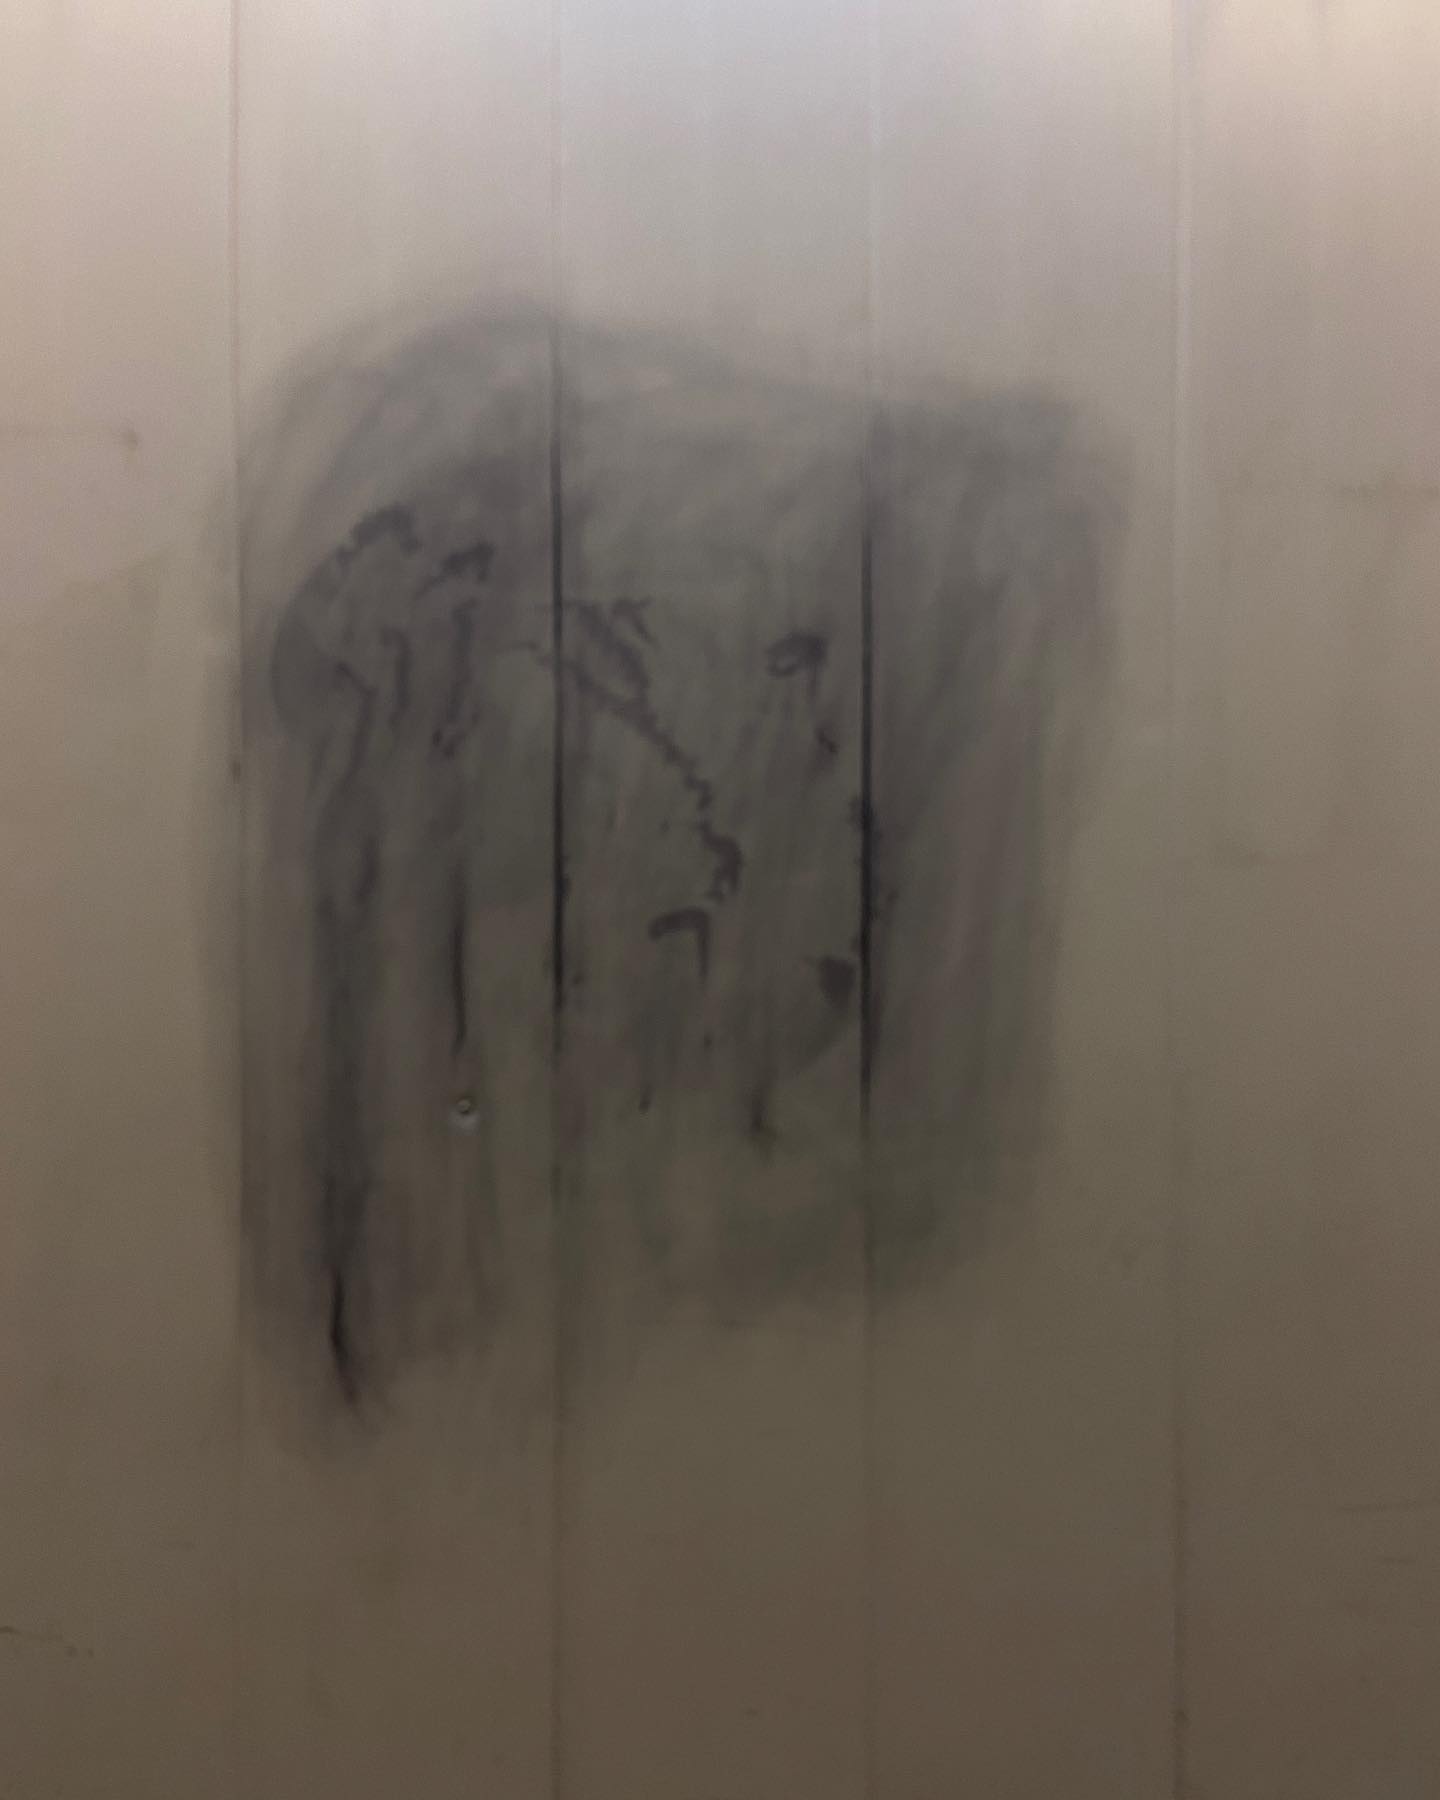 cloudy rubbed out graffiti on white plastic board with vertical joins. the rubbed out graffiti was in black and is darker in the joins of the plastic